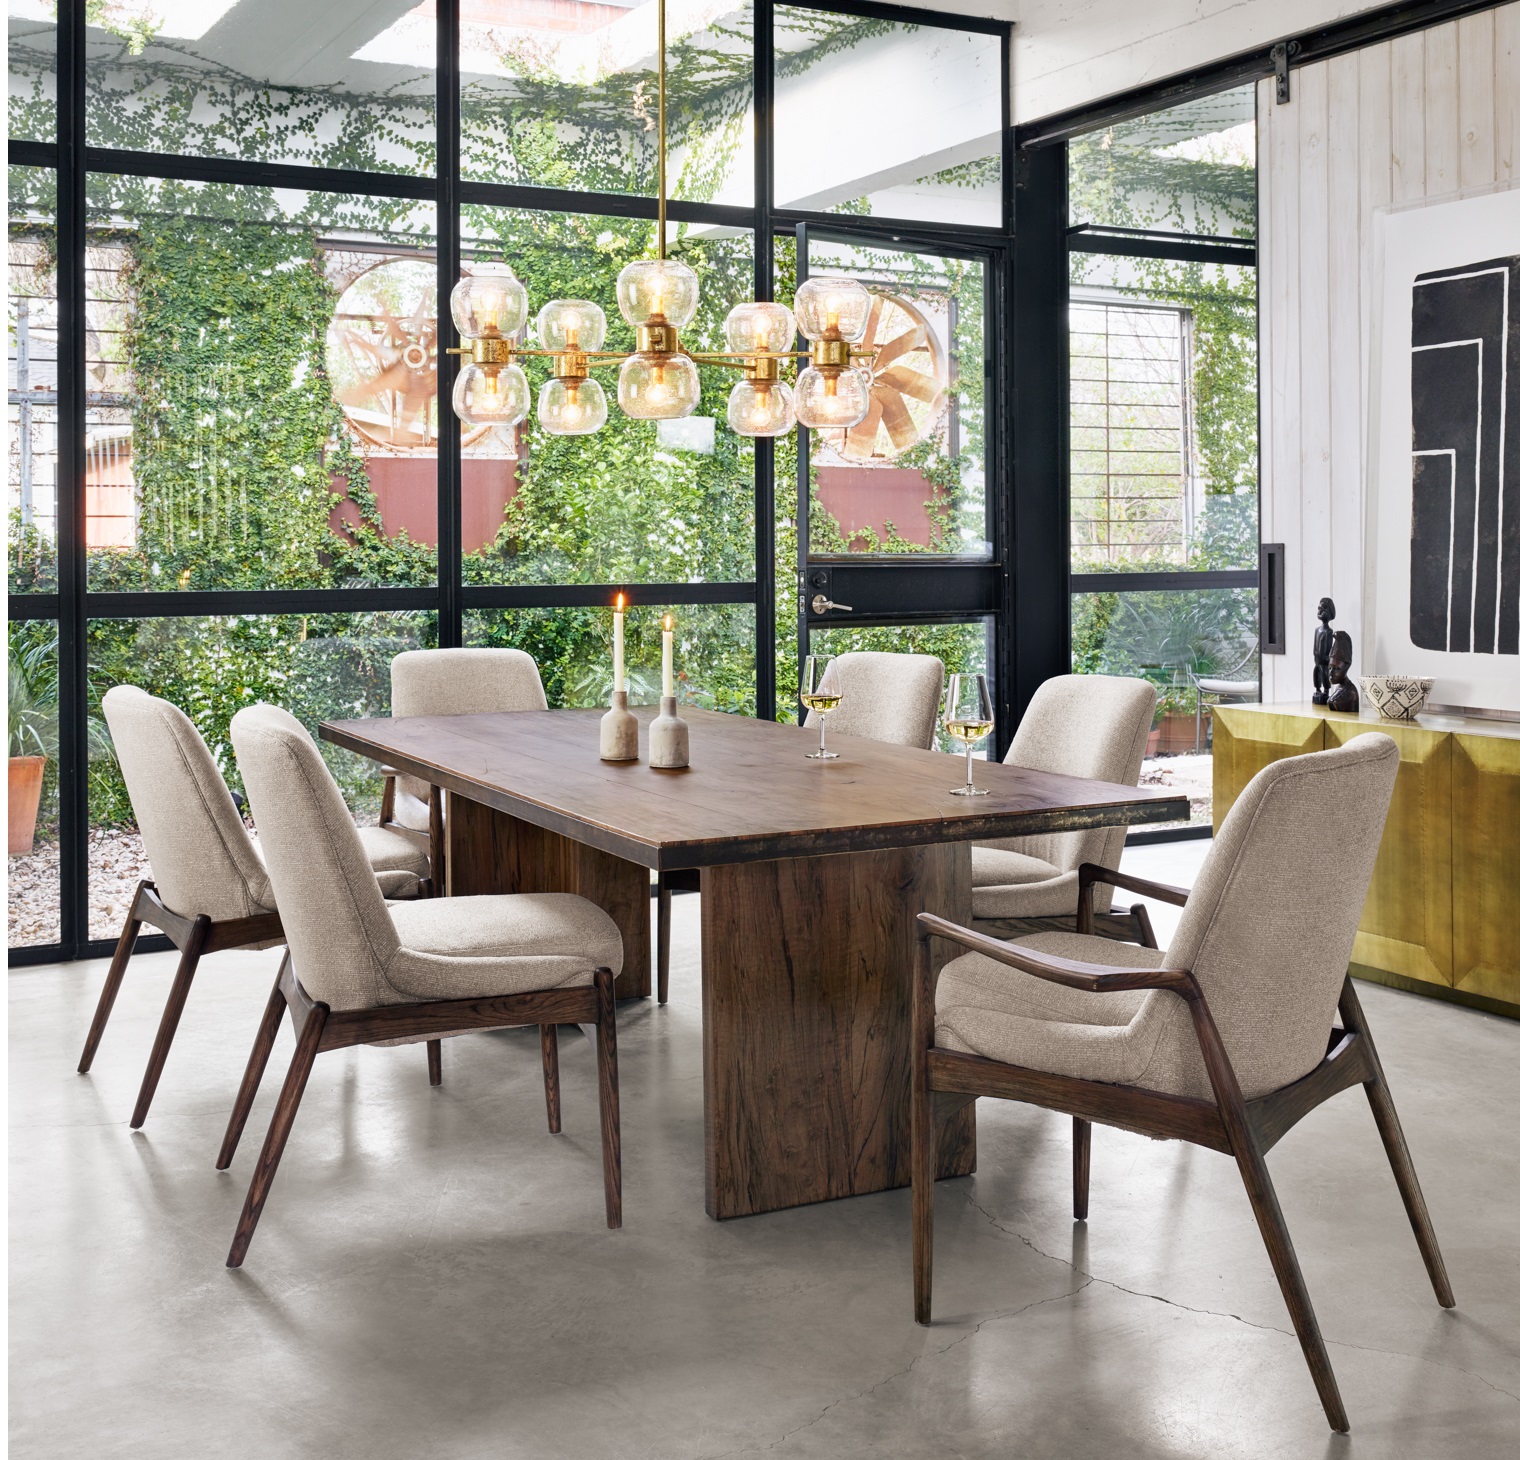 Transitional Dining Room Style